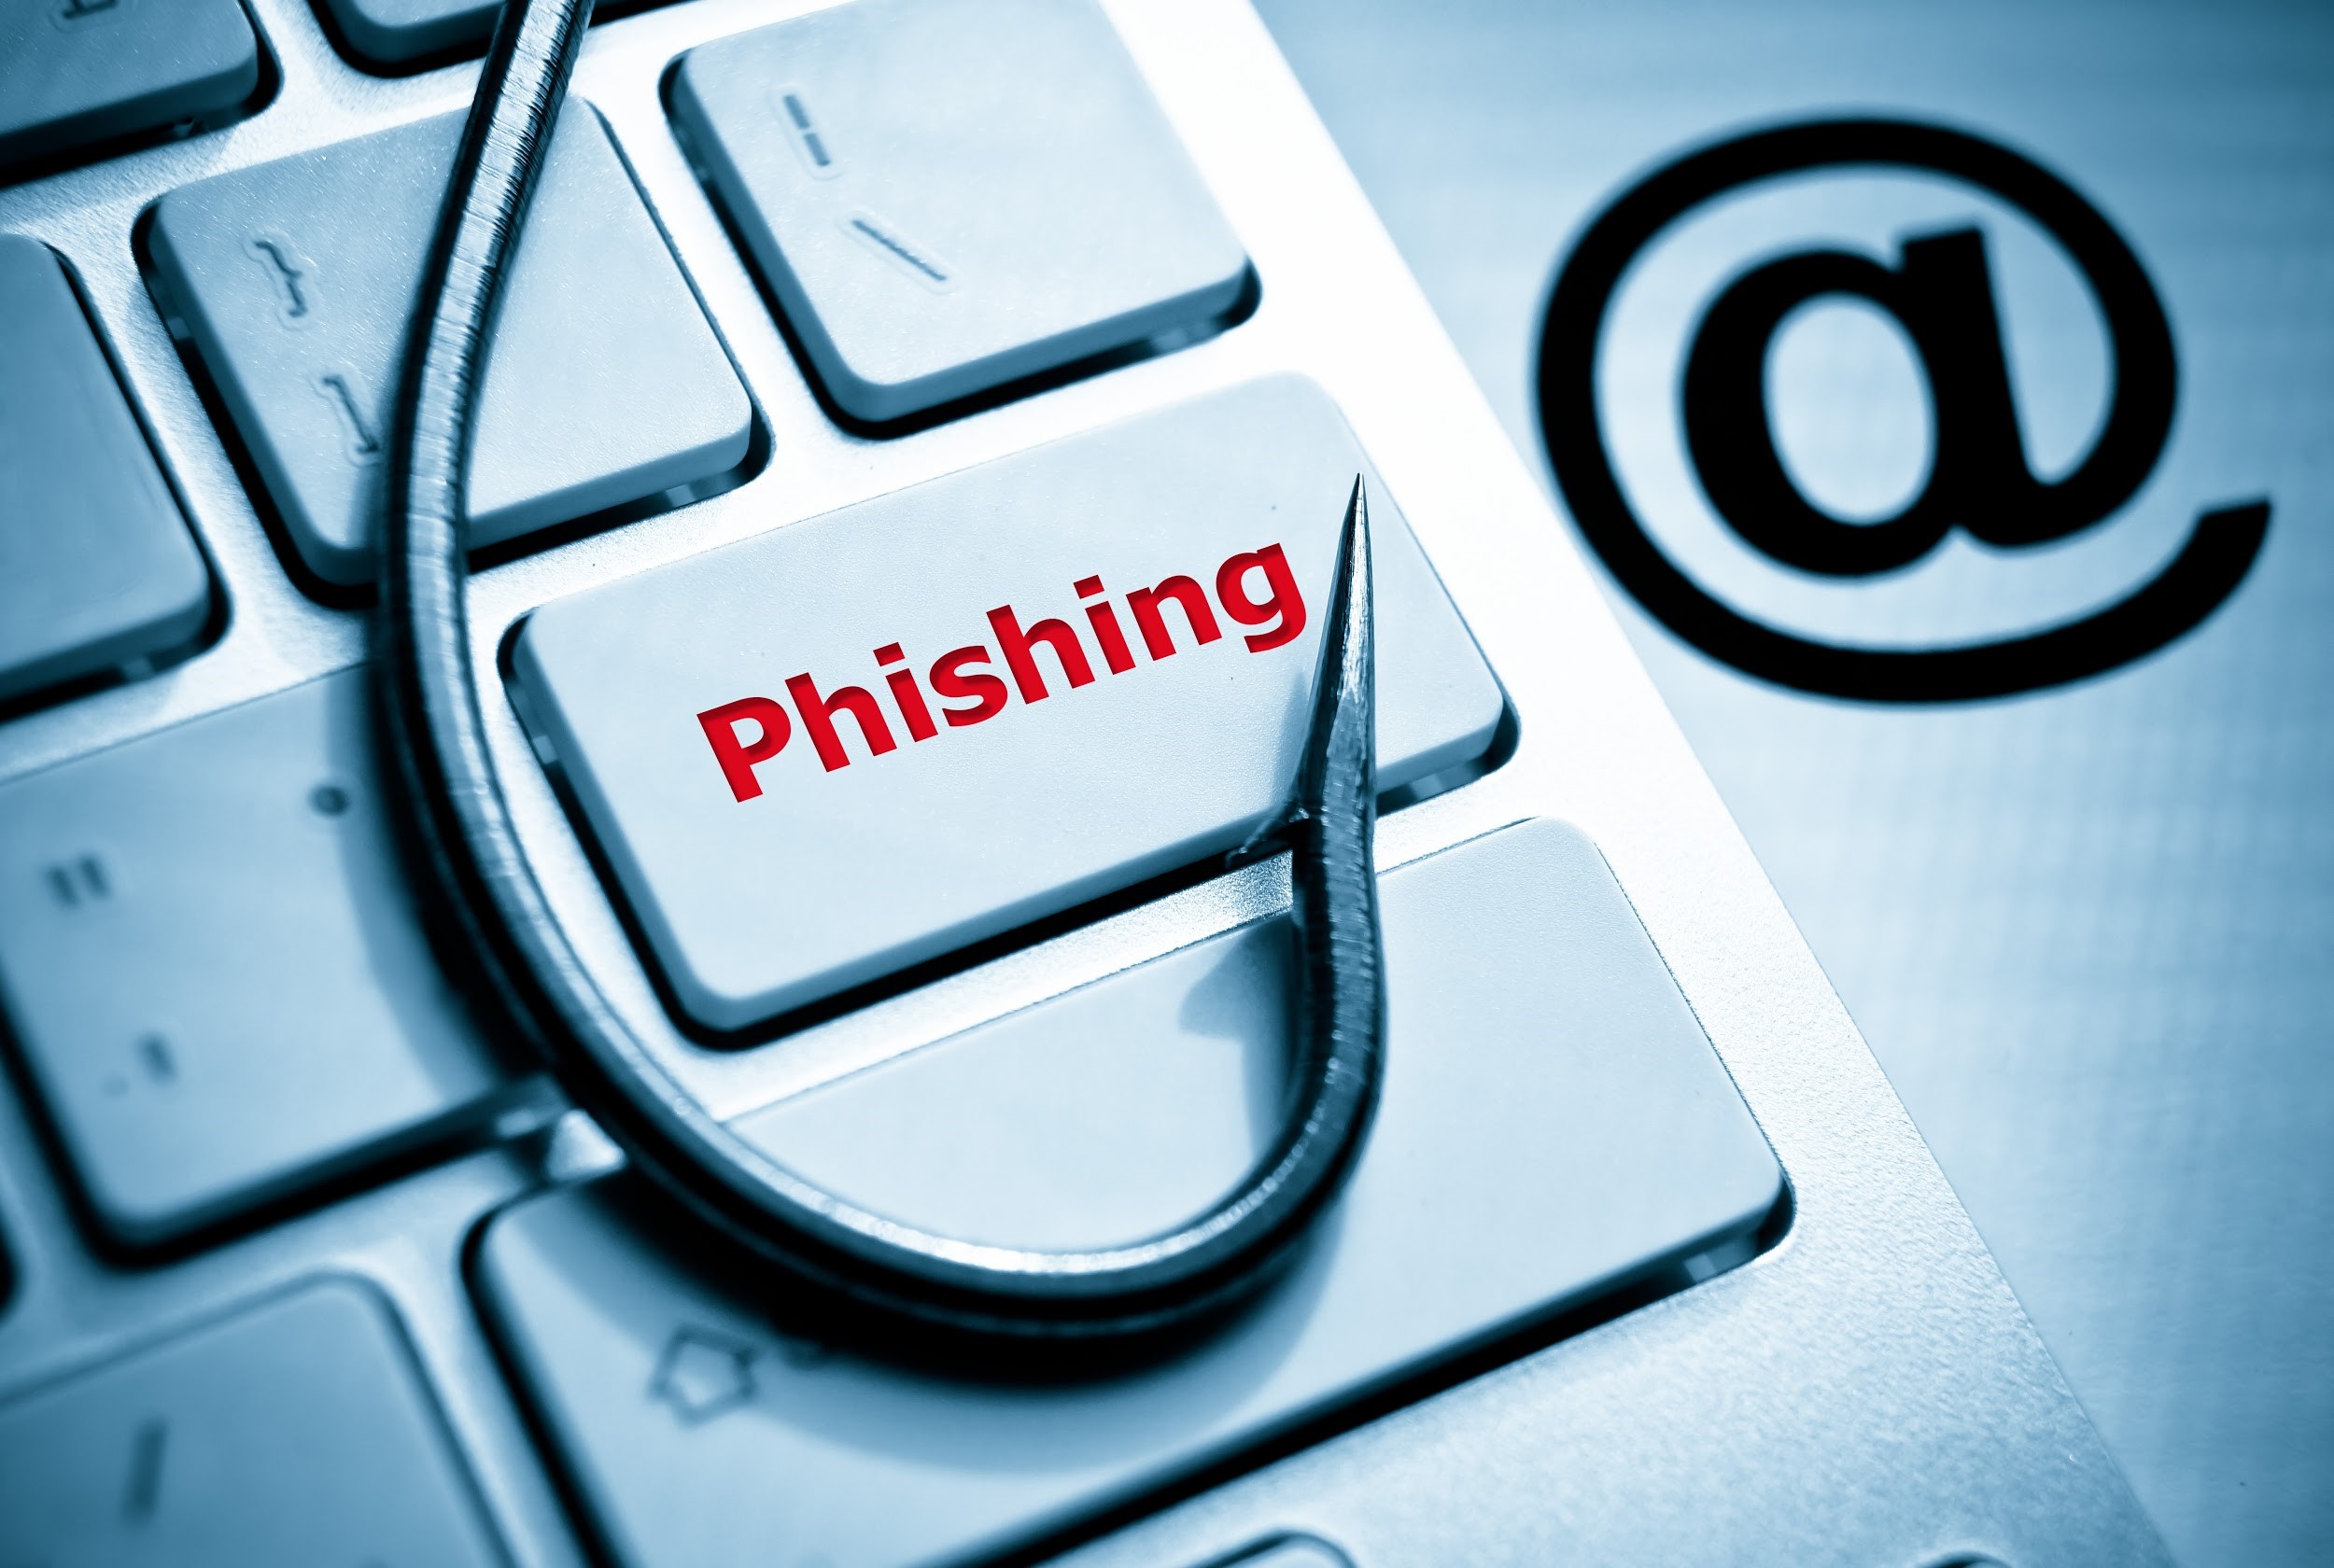 7 Top Email Phishing Scams 